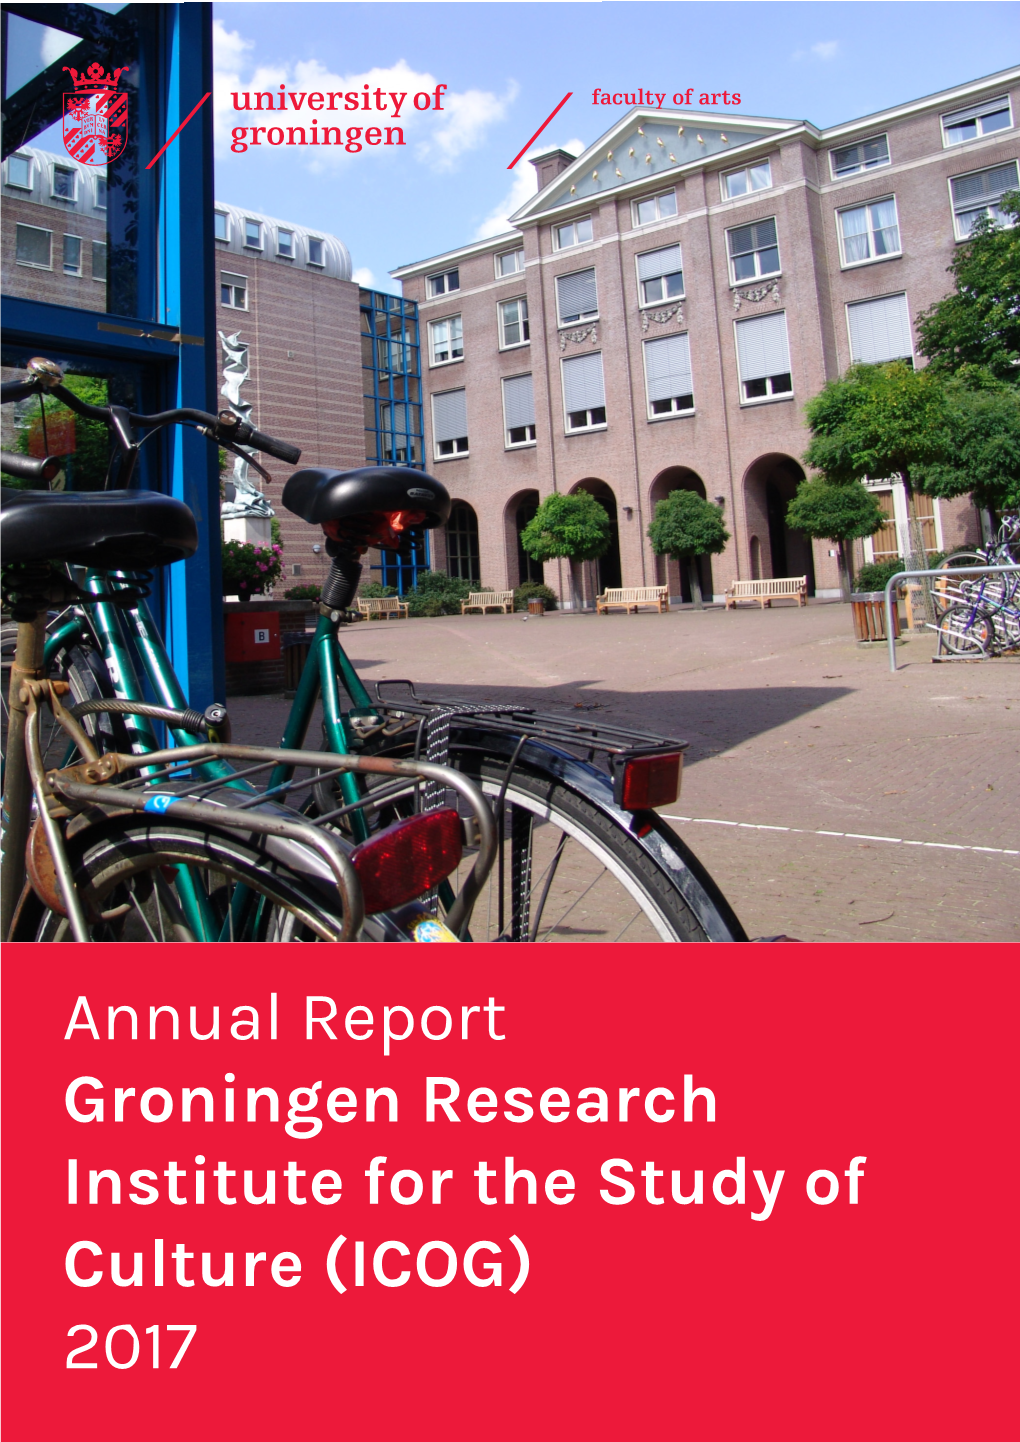 Annual Report Groningen Research Institute for the Study of Culture (ICOG) 2017